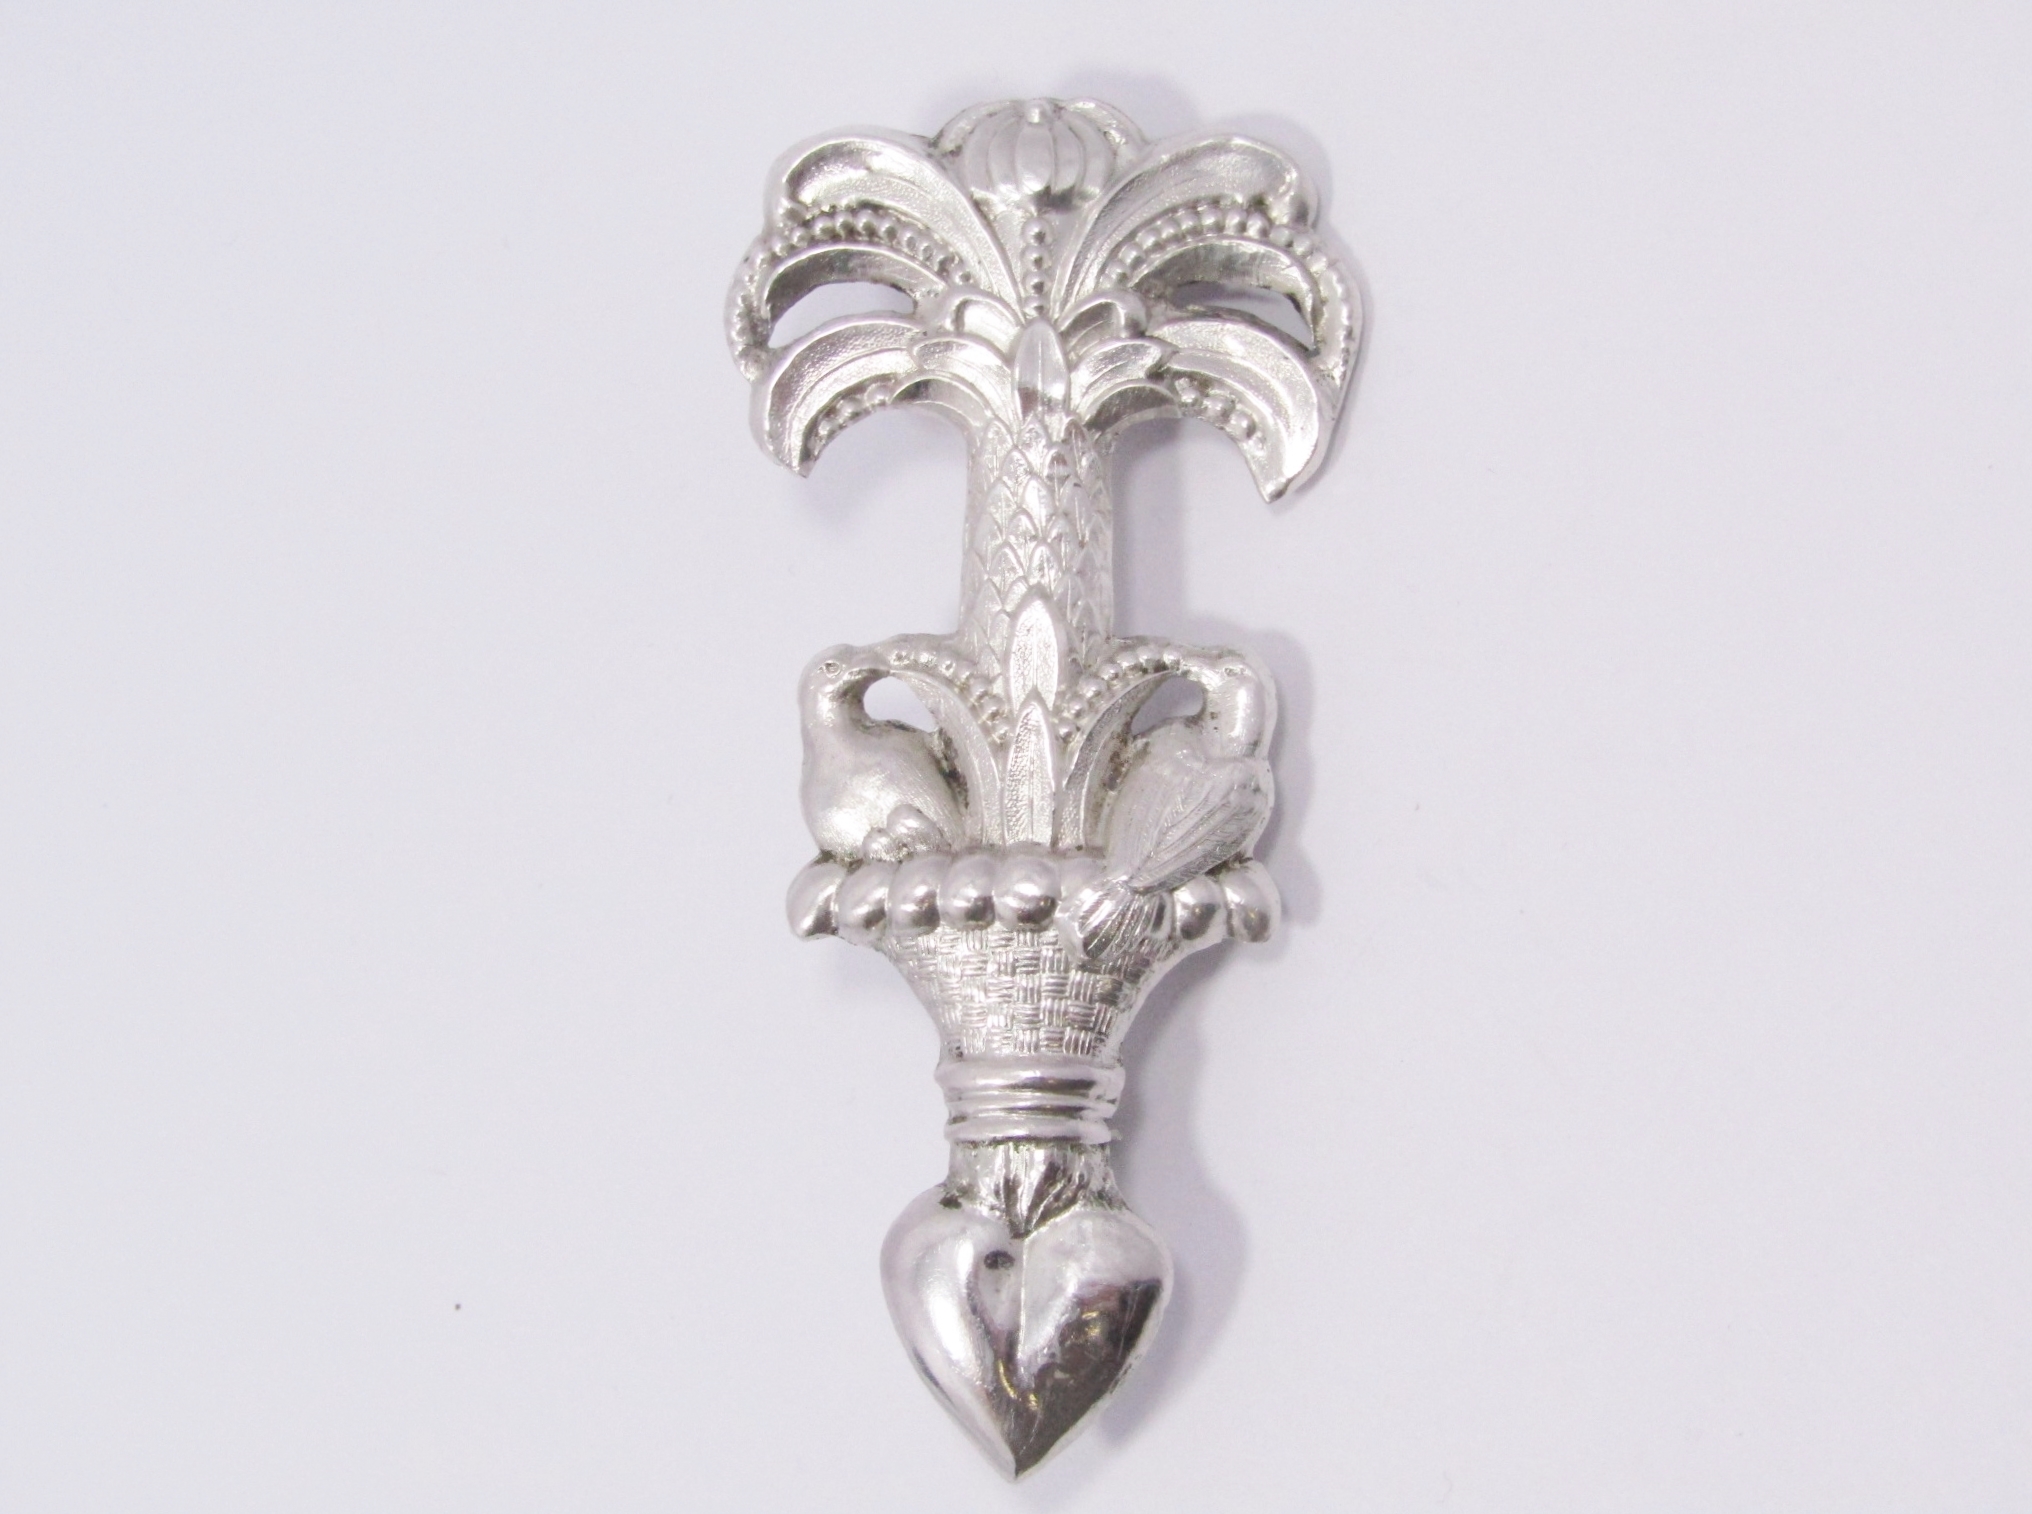 An Amazing Detailed Antique Brooch in Sterling Silver.